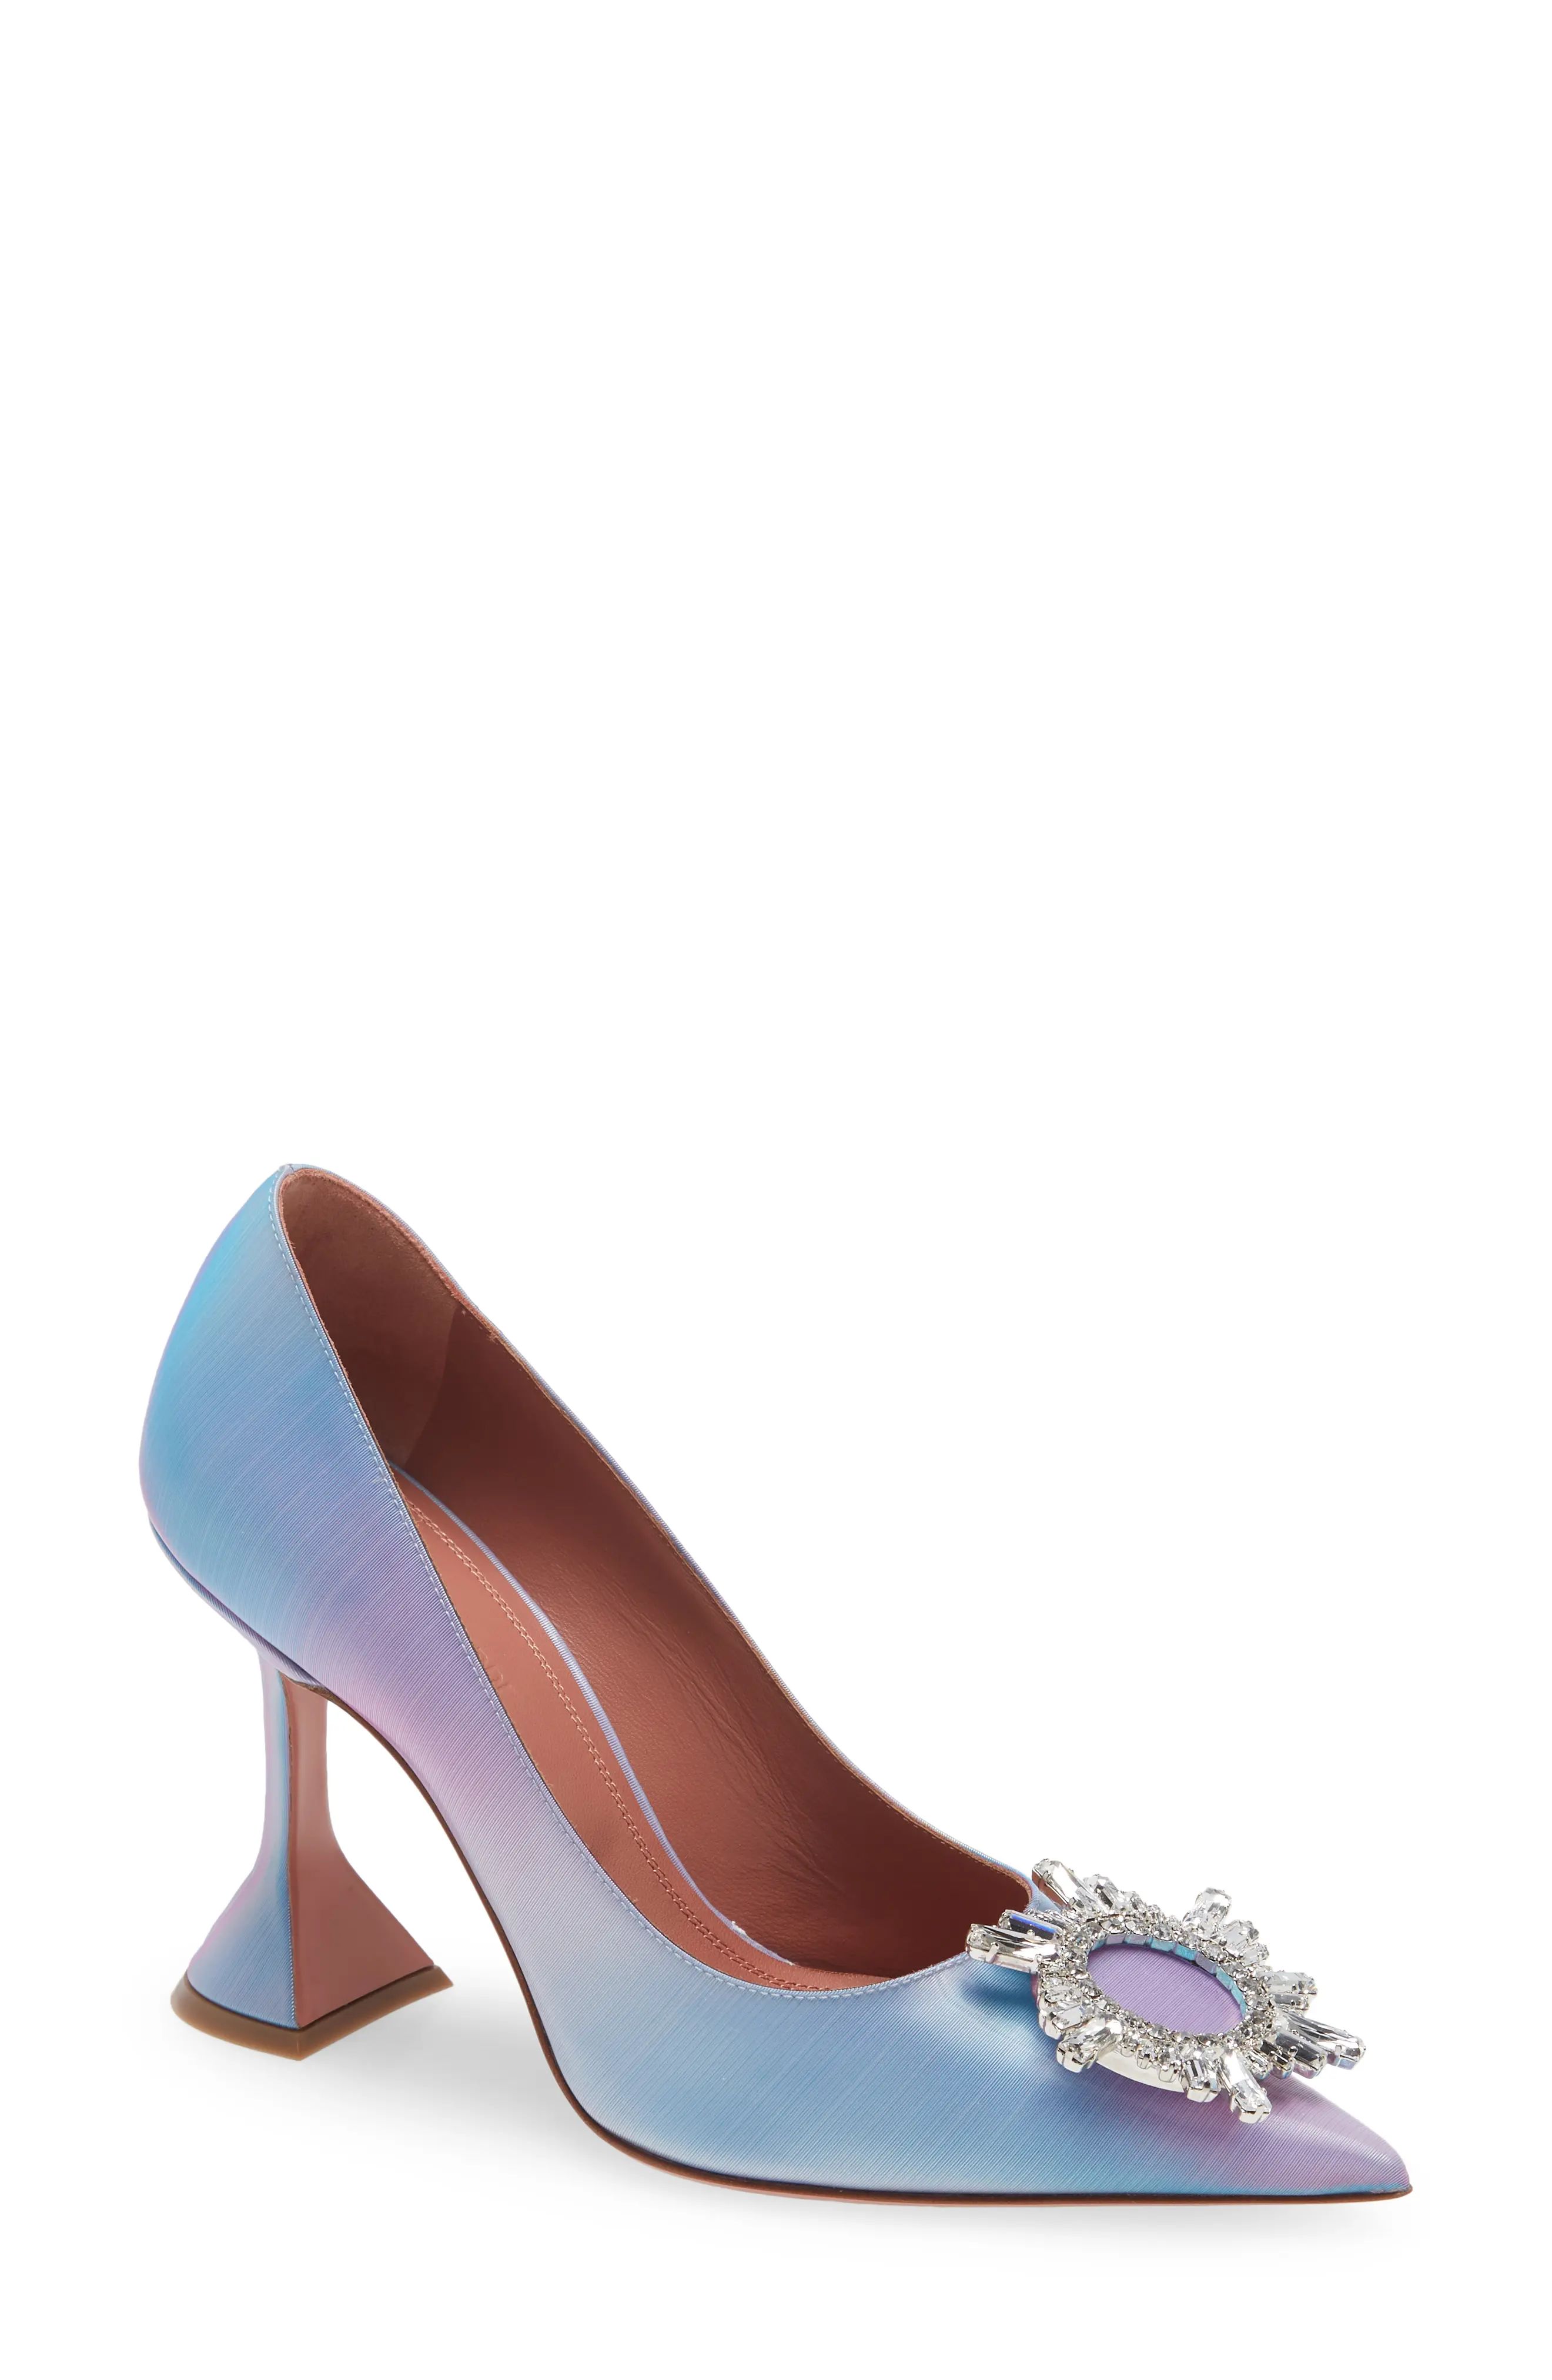 Amina Muaddi Begum Brooch Pointed Toe Pump, Size 11Us in Shadow Fairytale at Nordstrom | Nordstrom